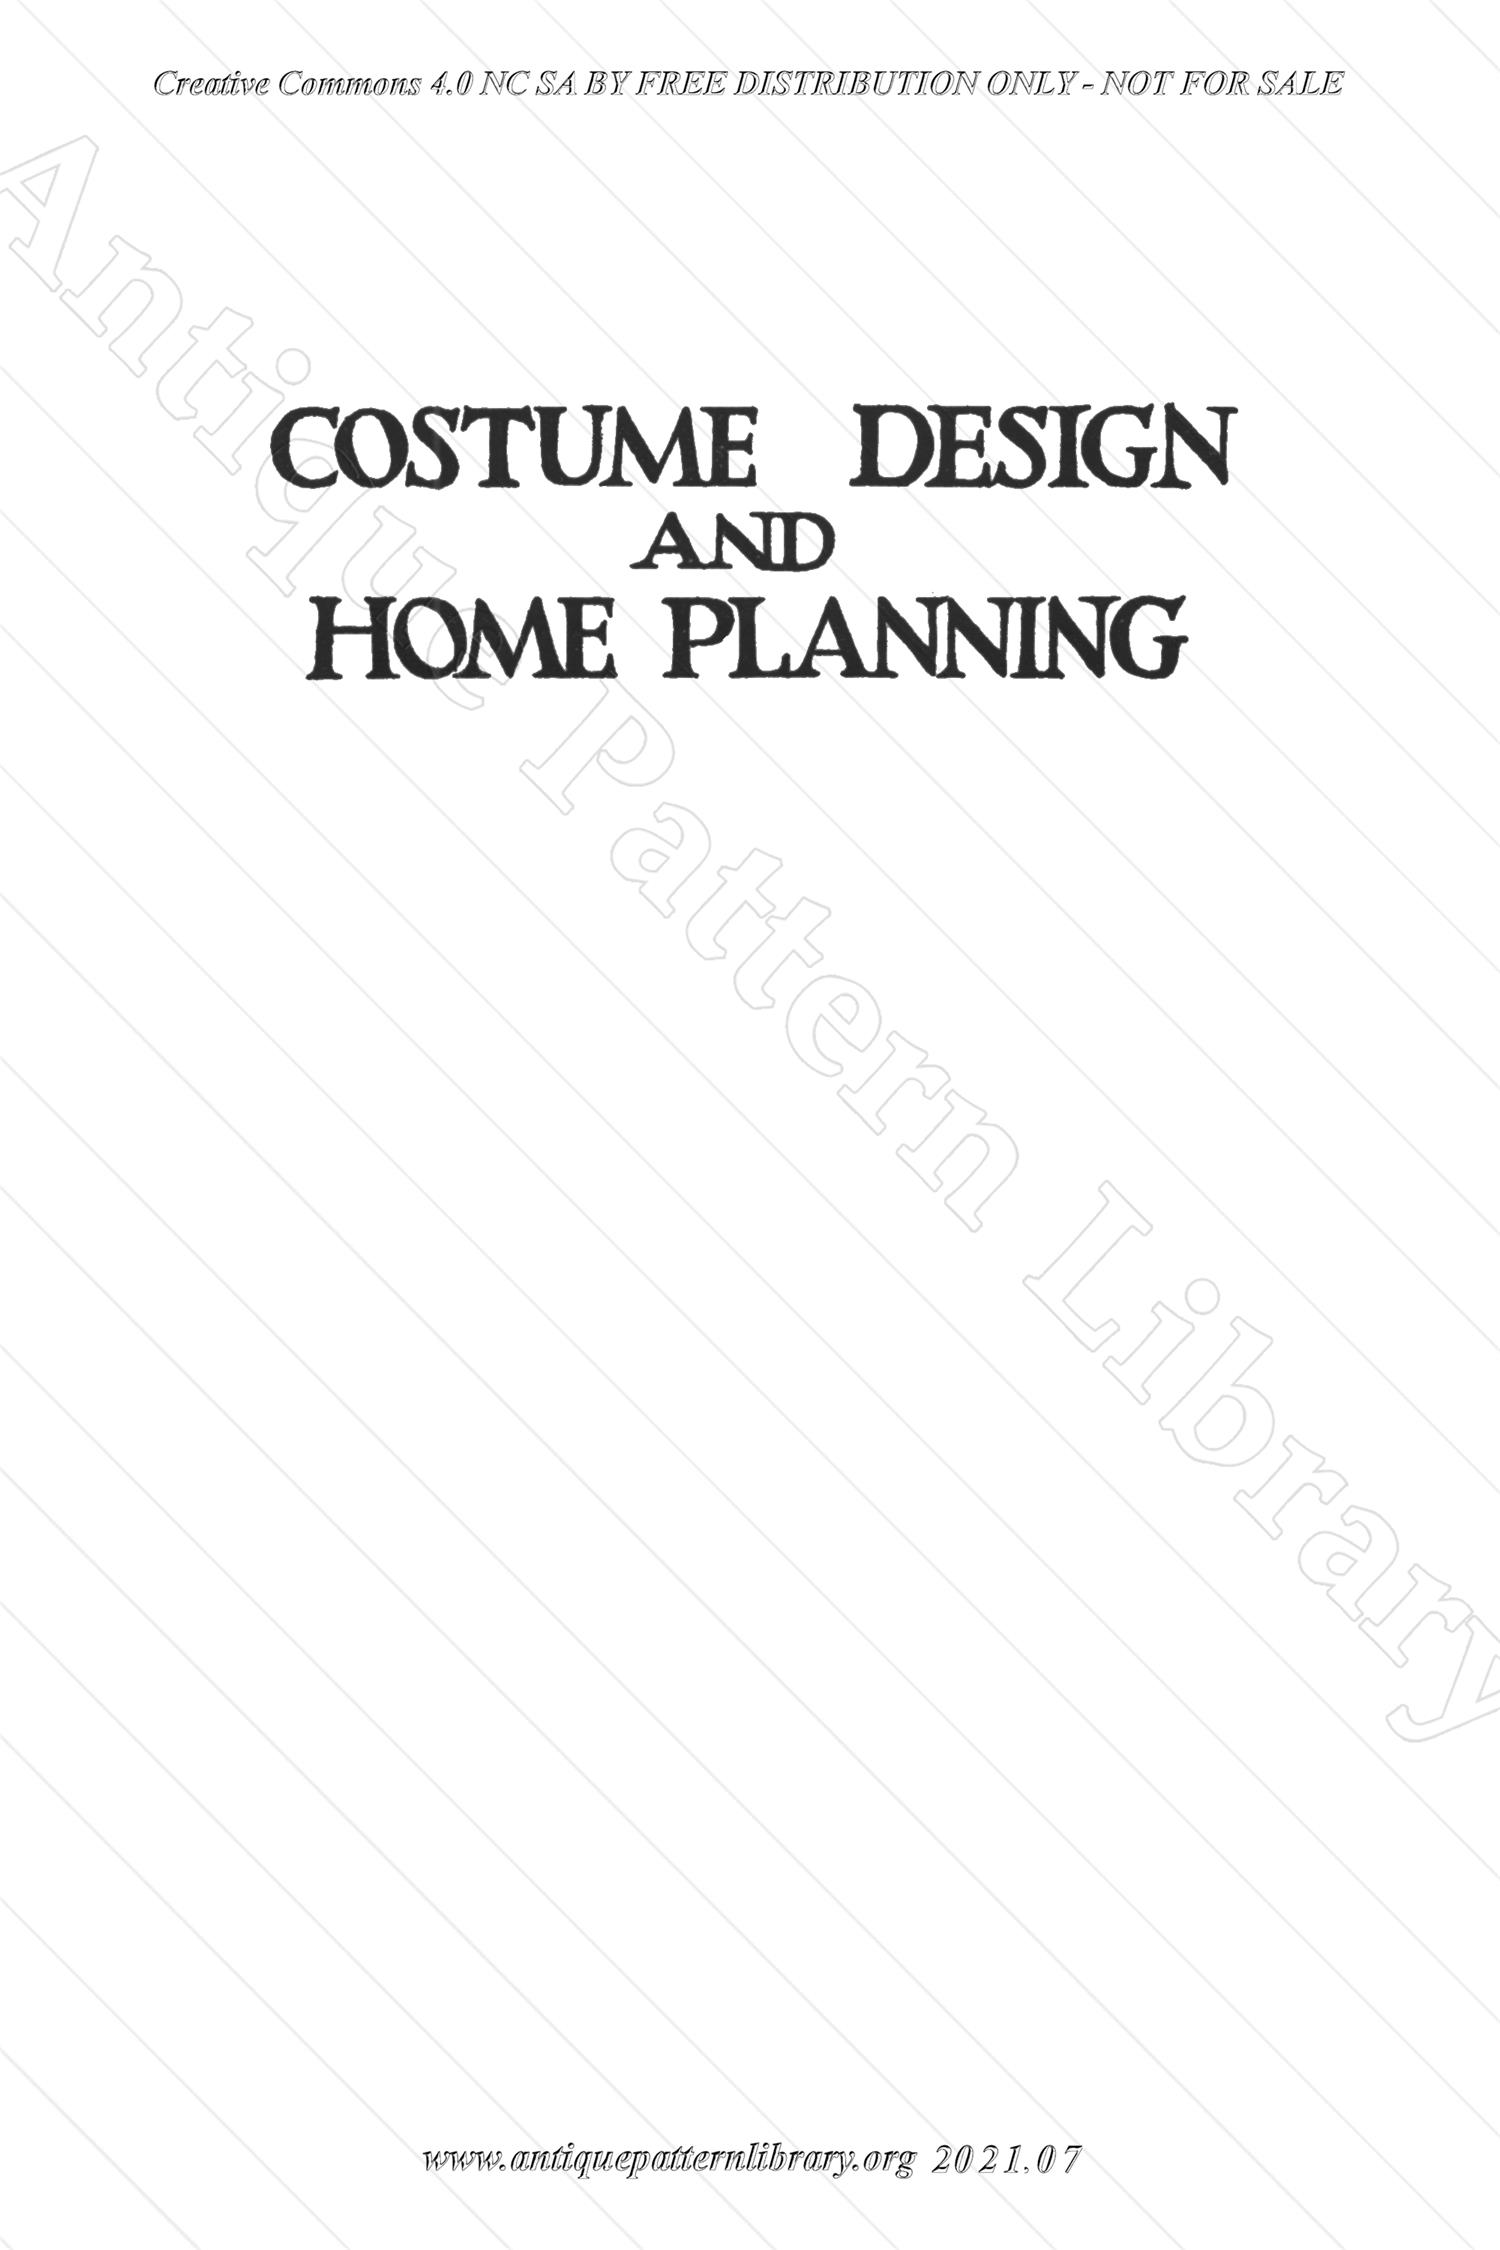 D-YS035 Costume Design and Home Planning